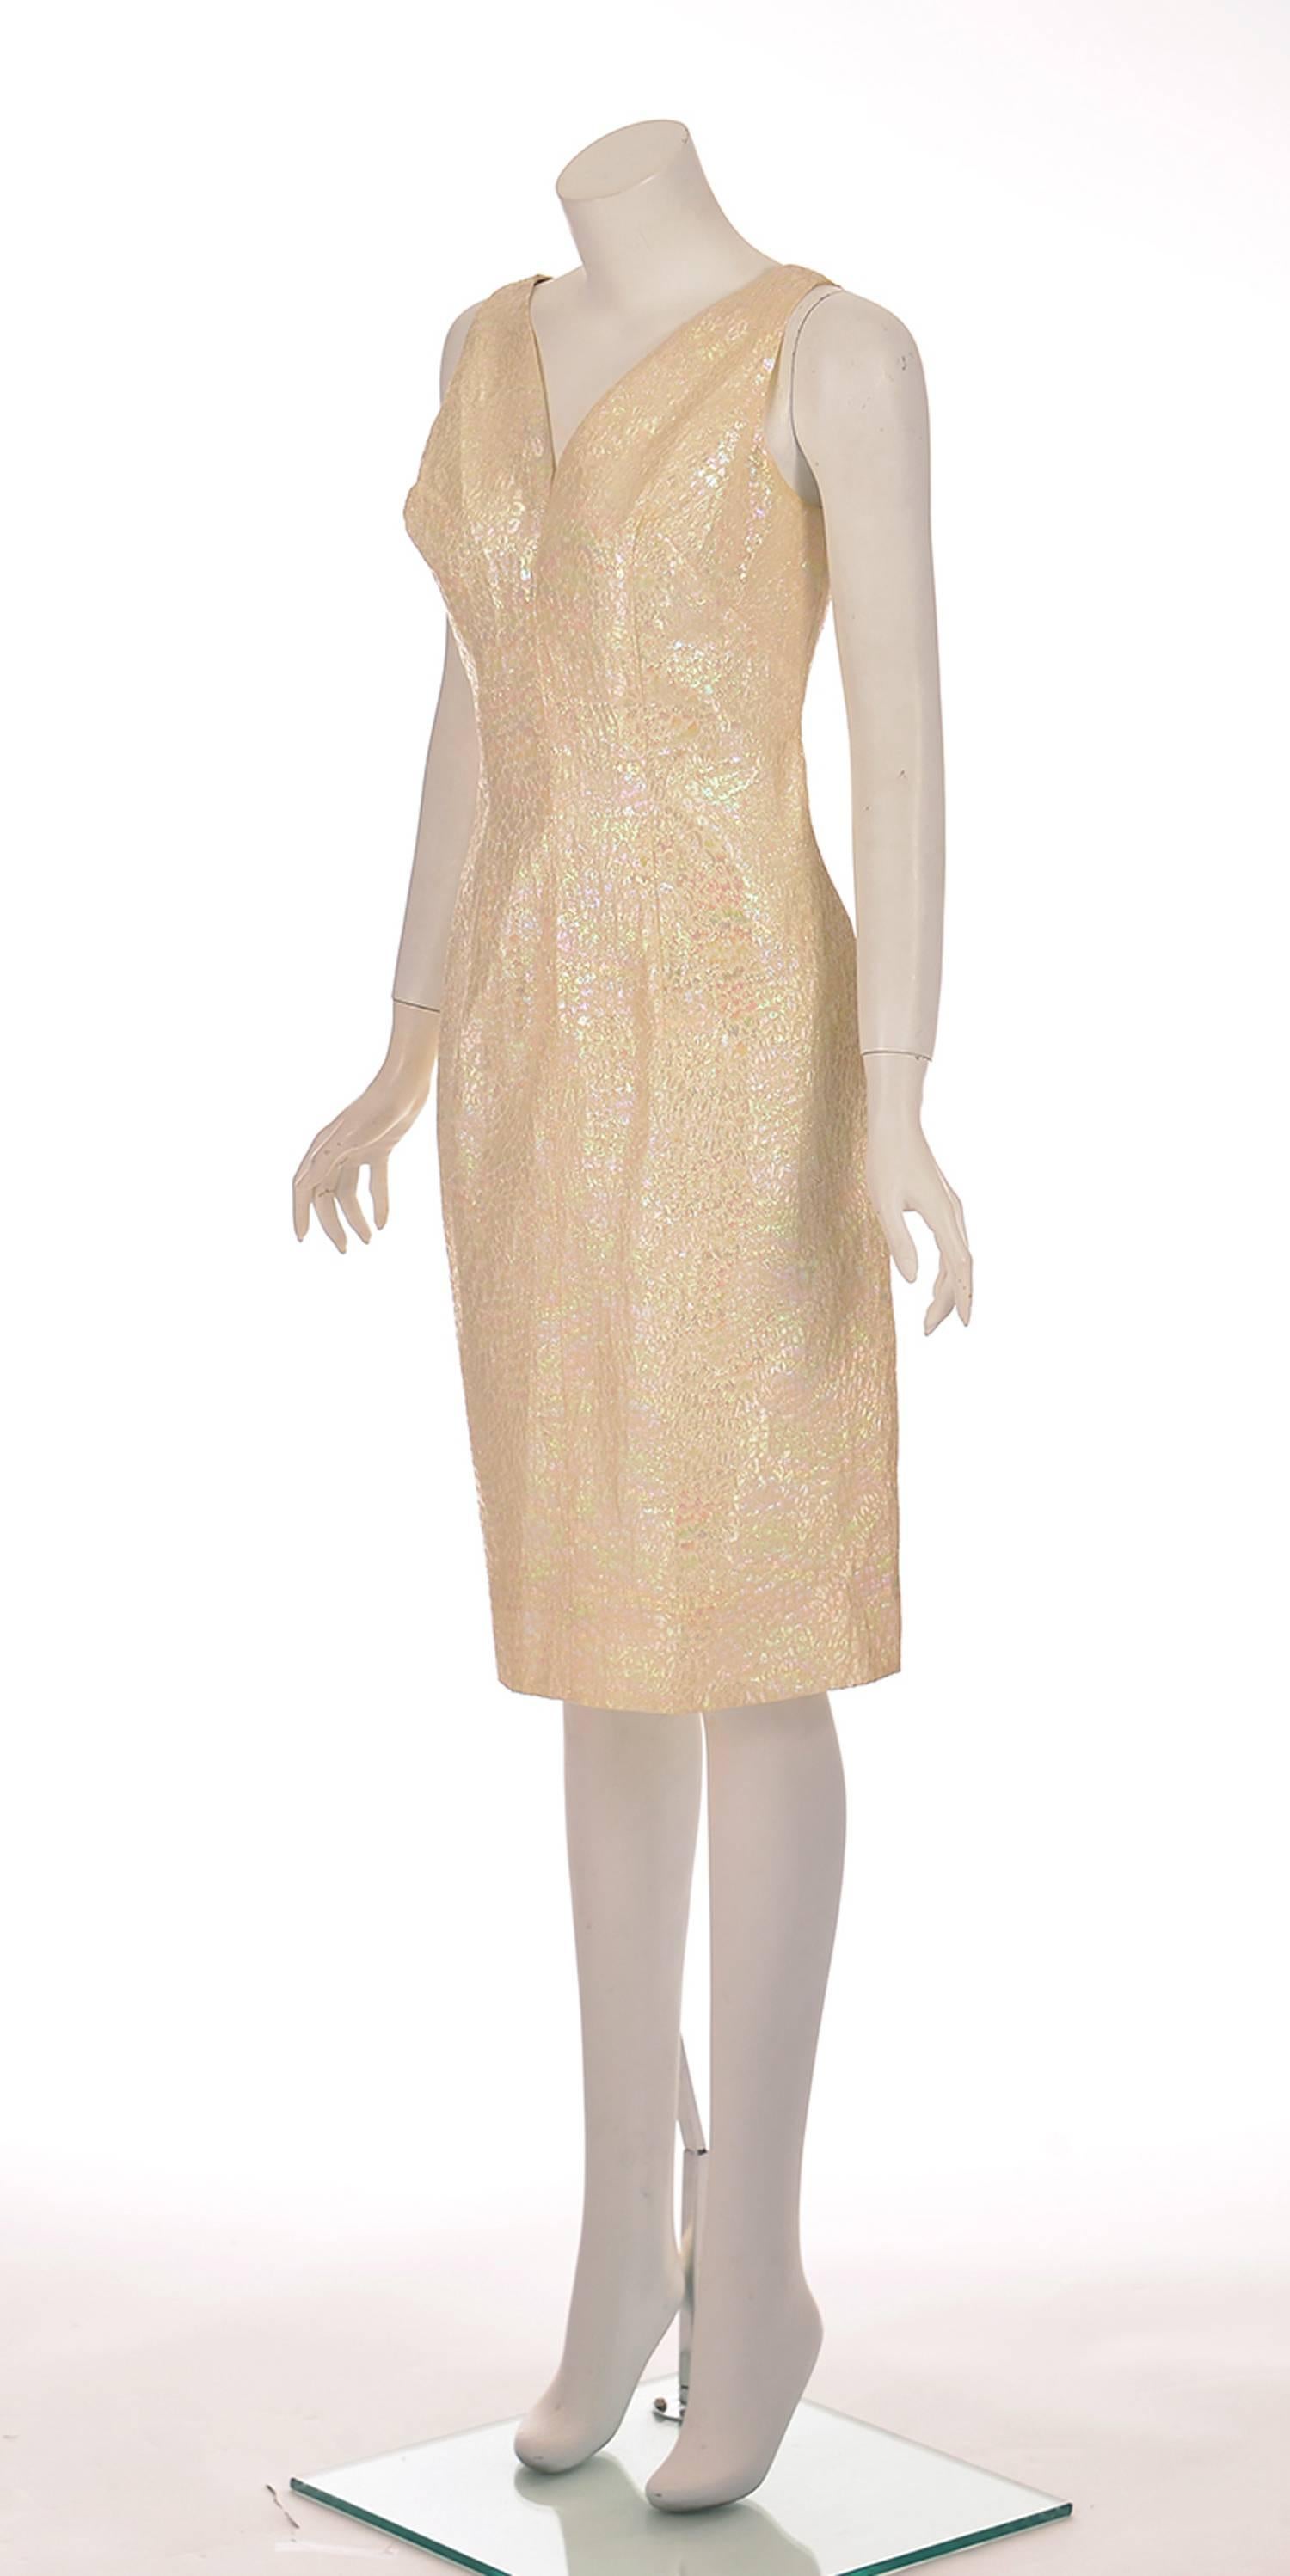 1970's California Brand Lilli Diamond cocktail dress. This gorgeous white pearl iridescent dress features an organic scale-like pattern that shines like a rainbow. The sleeveless dress has a deep V-neck in both the front and back, and has a center